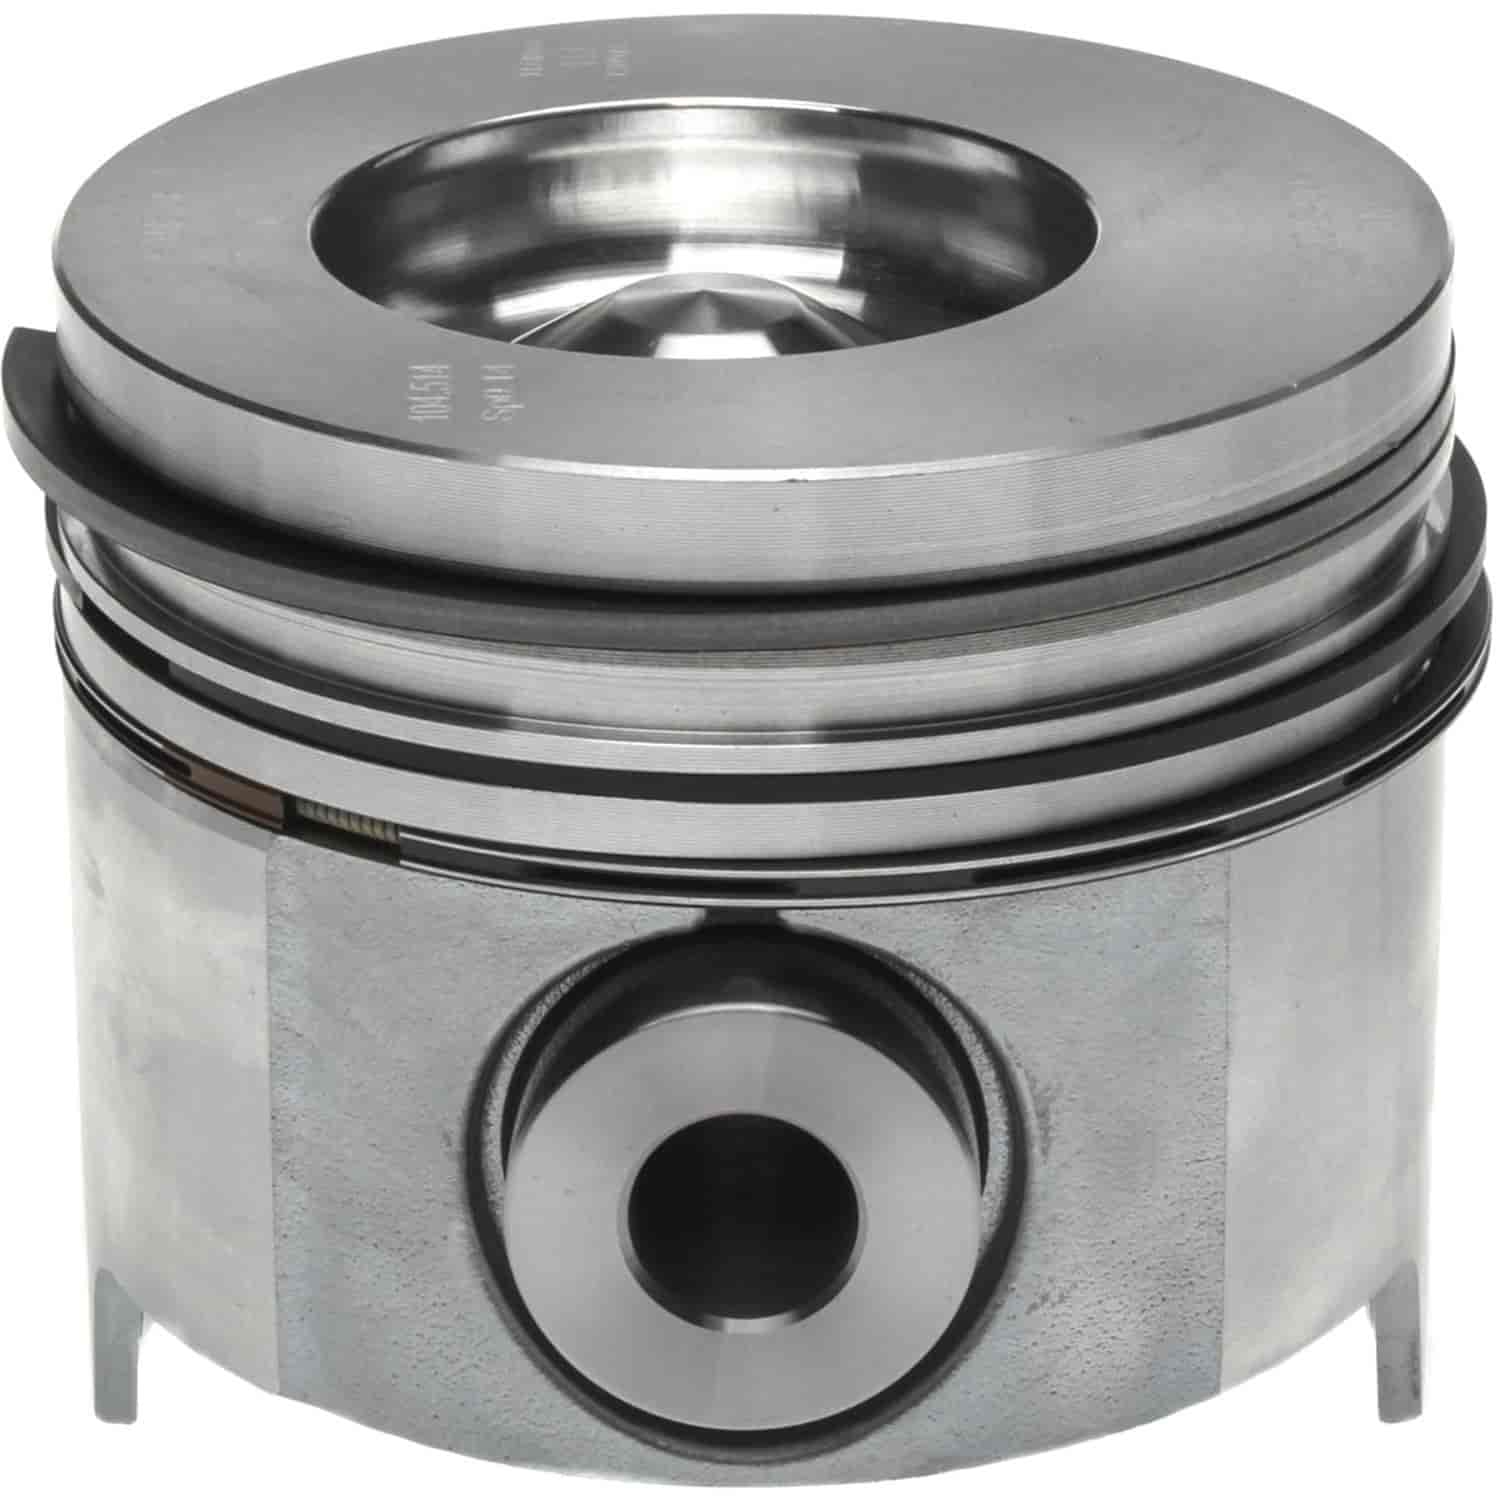 Piston and Rings Set 2001-2005 Chevy/GMC Duramax Diesel V8 6.6L Left Bank with 4.095" Bore (+.040")